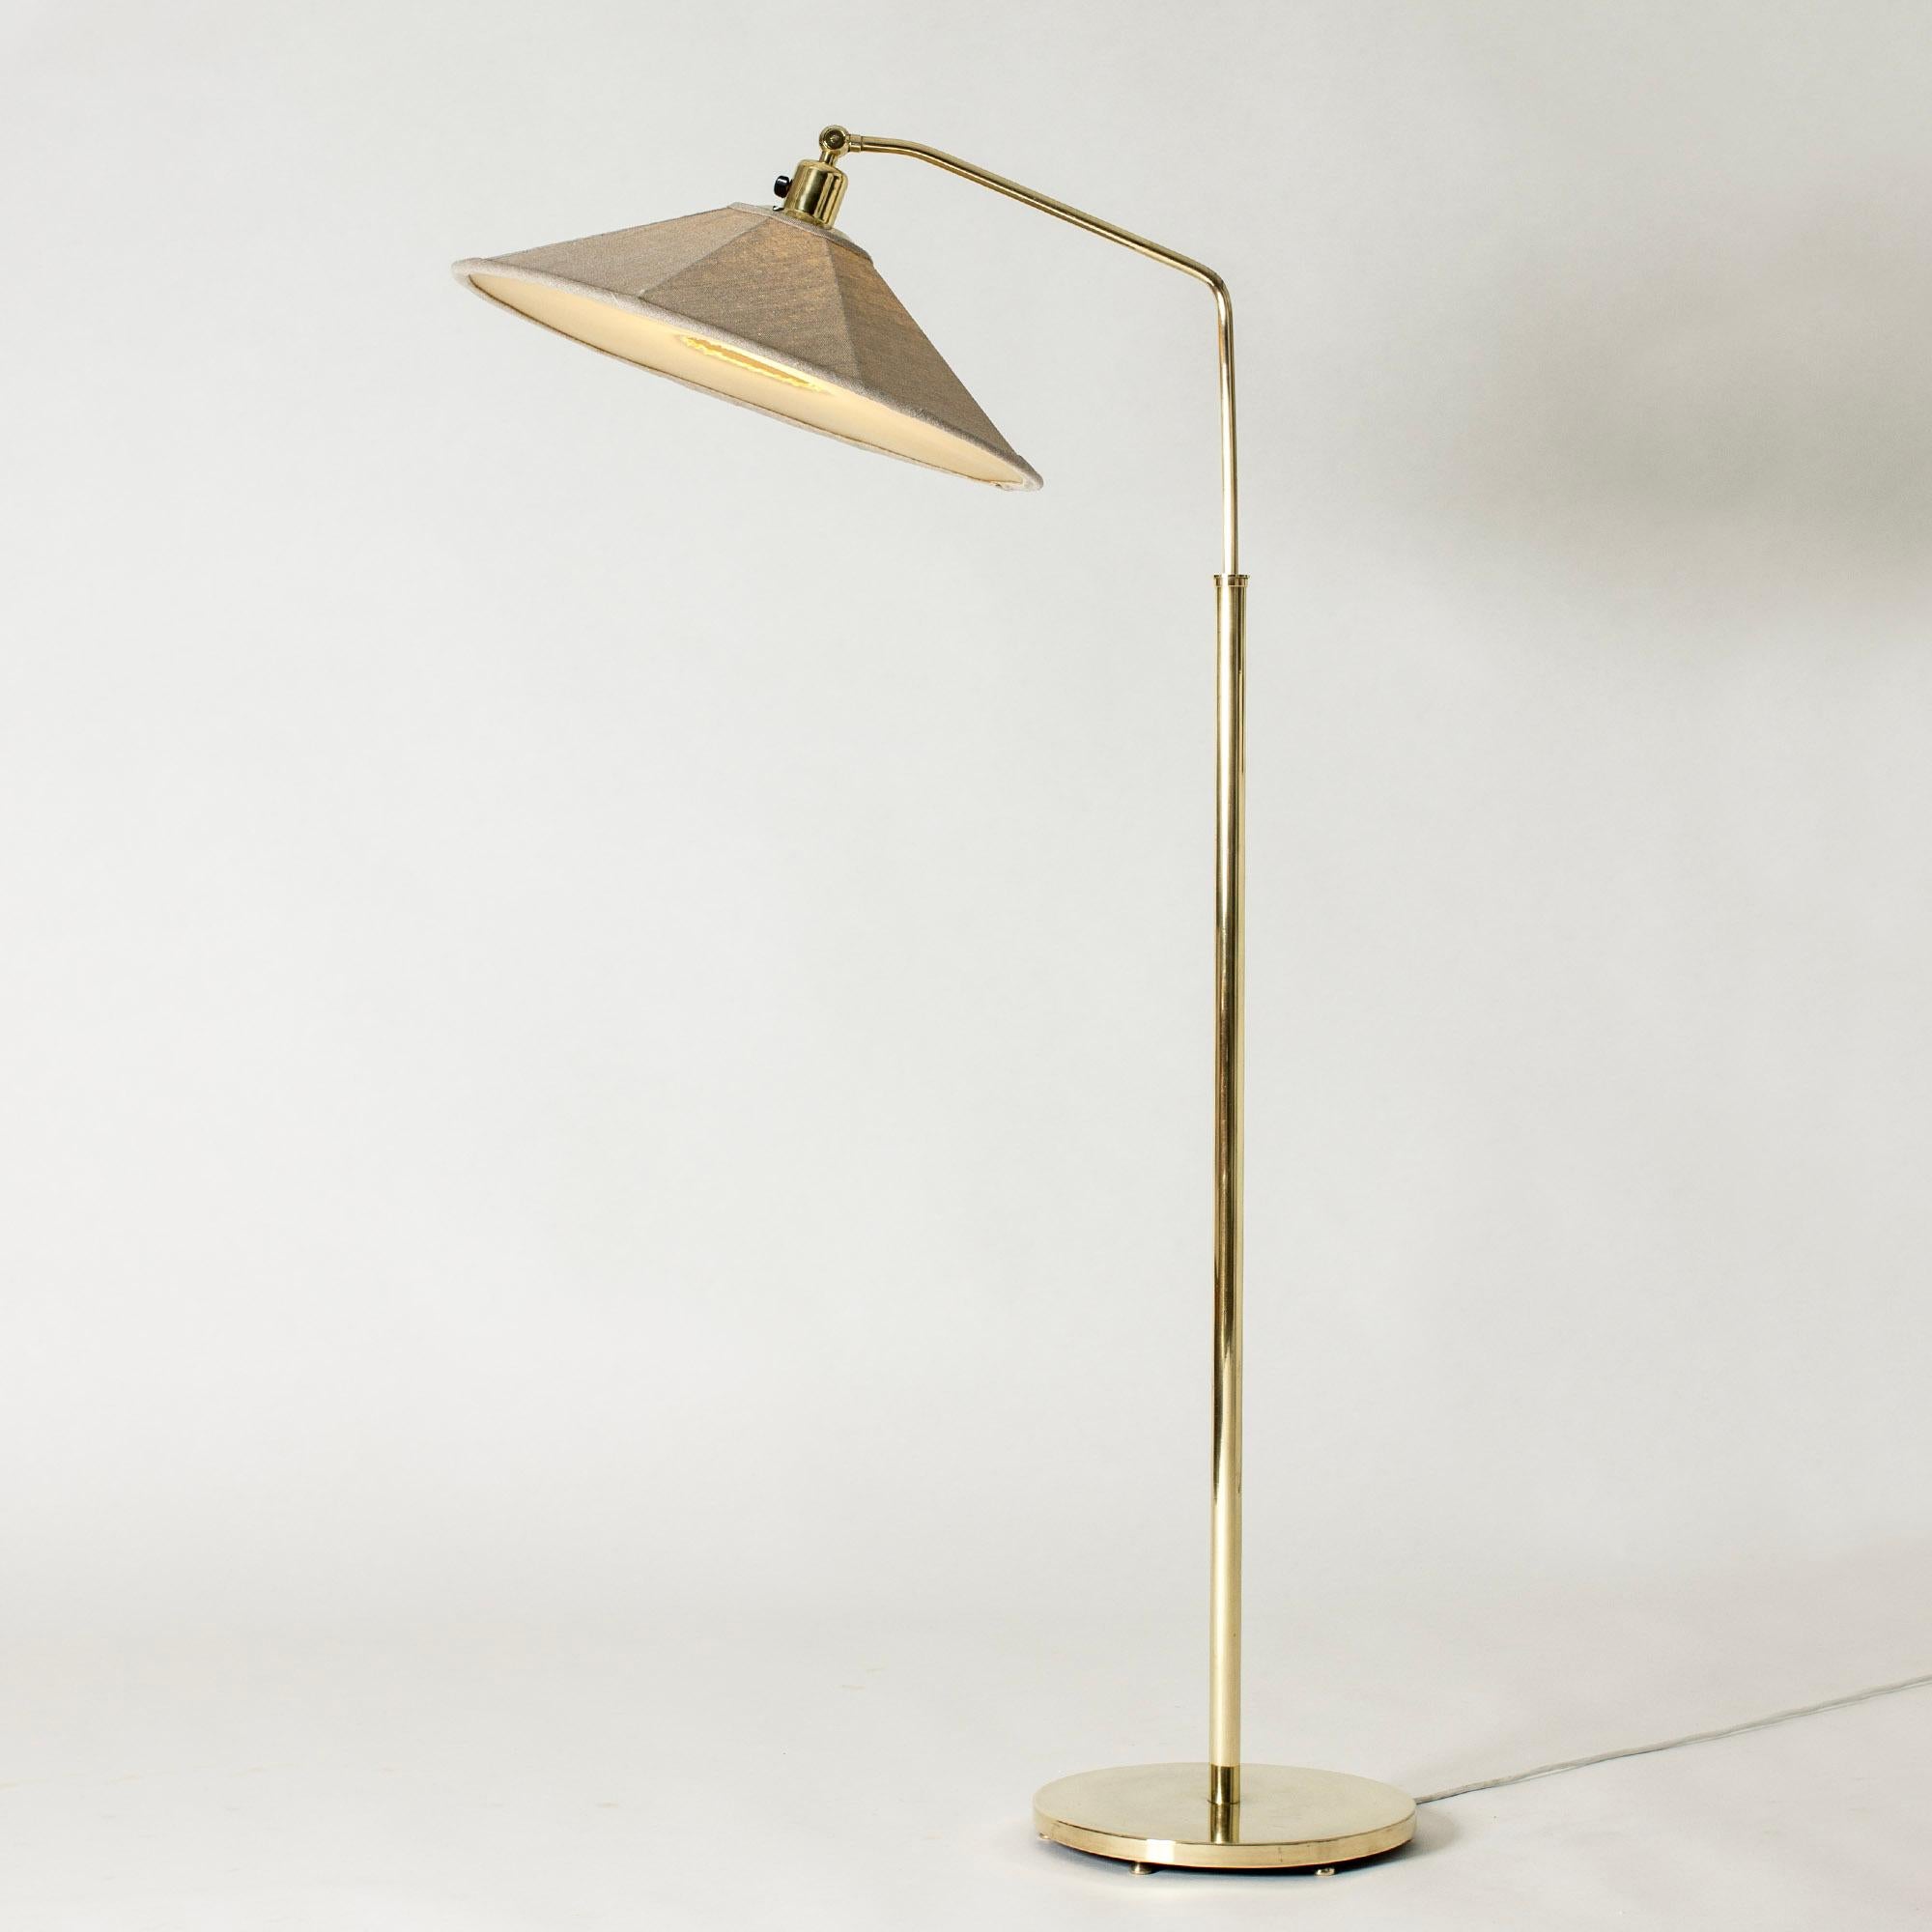 Rare, elegant floor lamp from Böhlmarks, made from brass with a wide textile shade. Possible to adjust the height by almost 40 centimeters. A very contemporary, sleek design.

Height 133-171 cm.